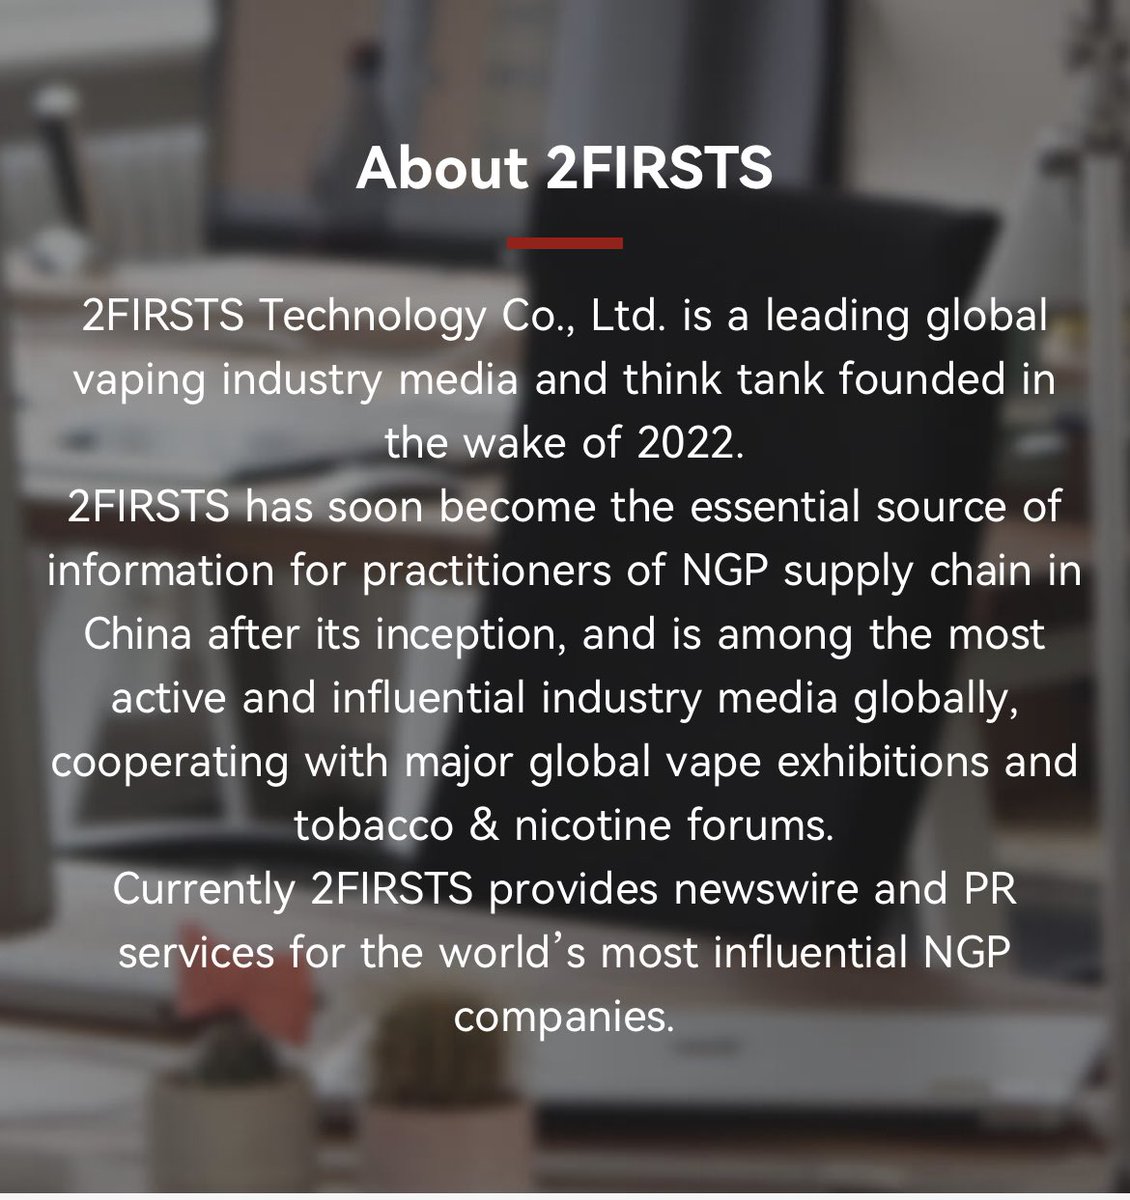 Are you suggesting that a vaping industry PR company is a reliable source of information to guide policy?